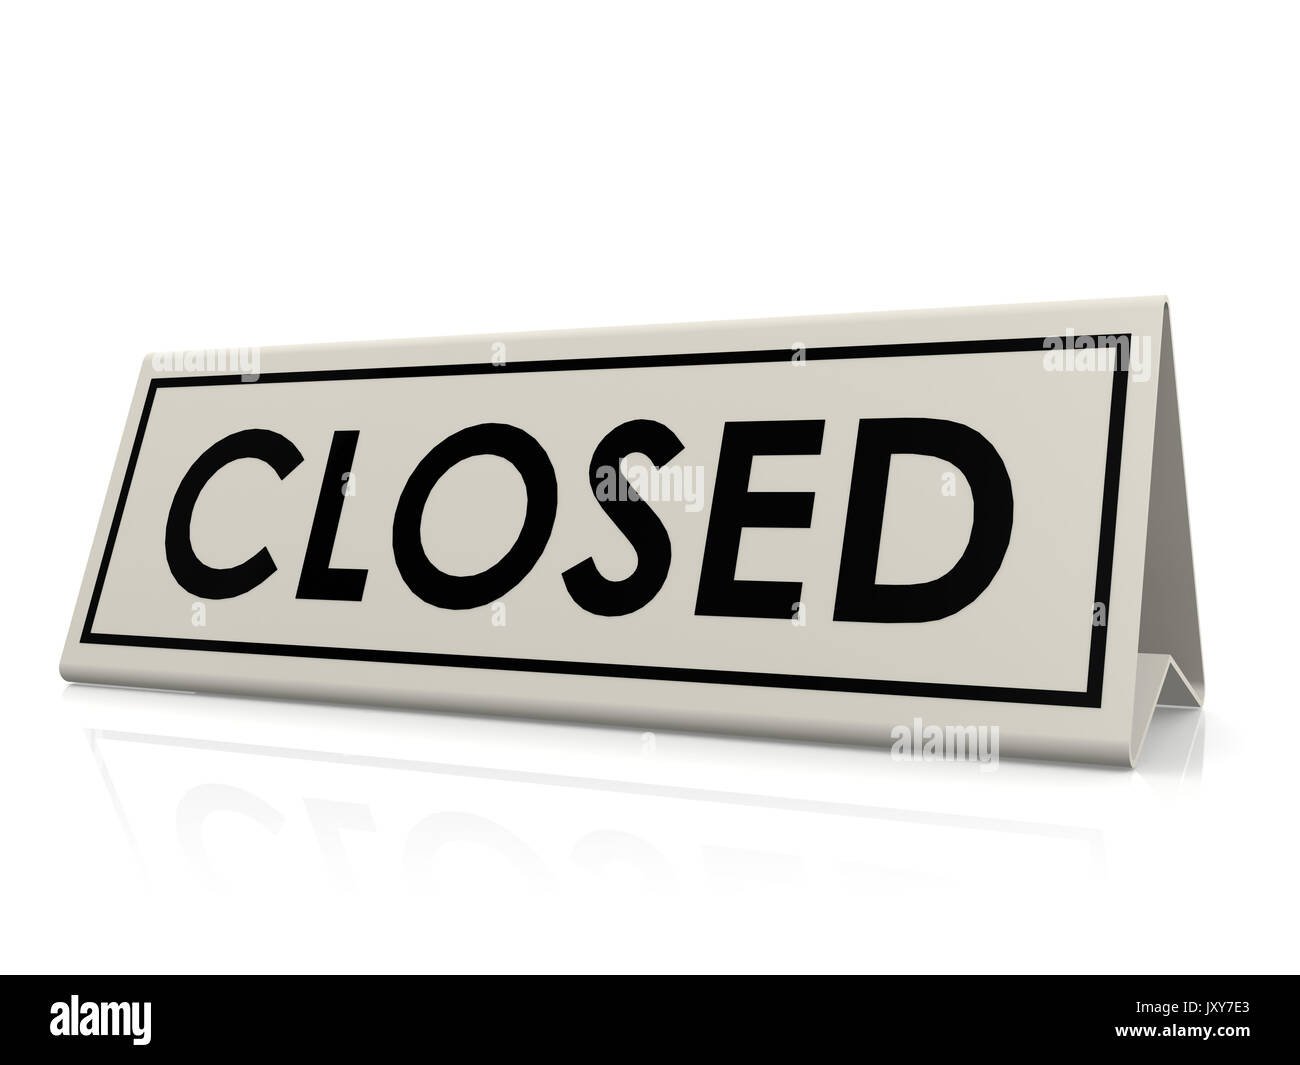 Closed table sign concept image with hi-res rendered artwork that could be used for any graphic design. Stock Photo